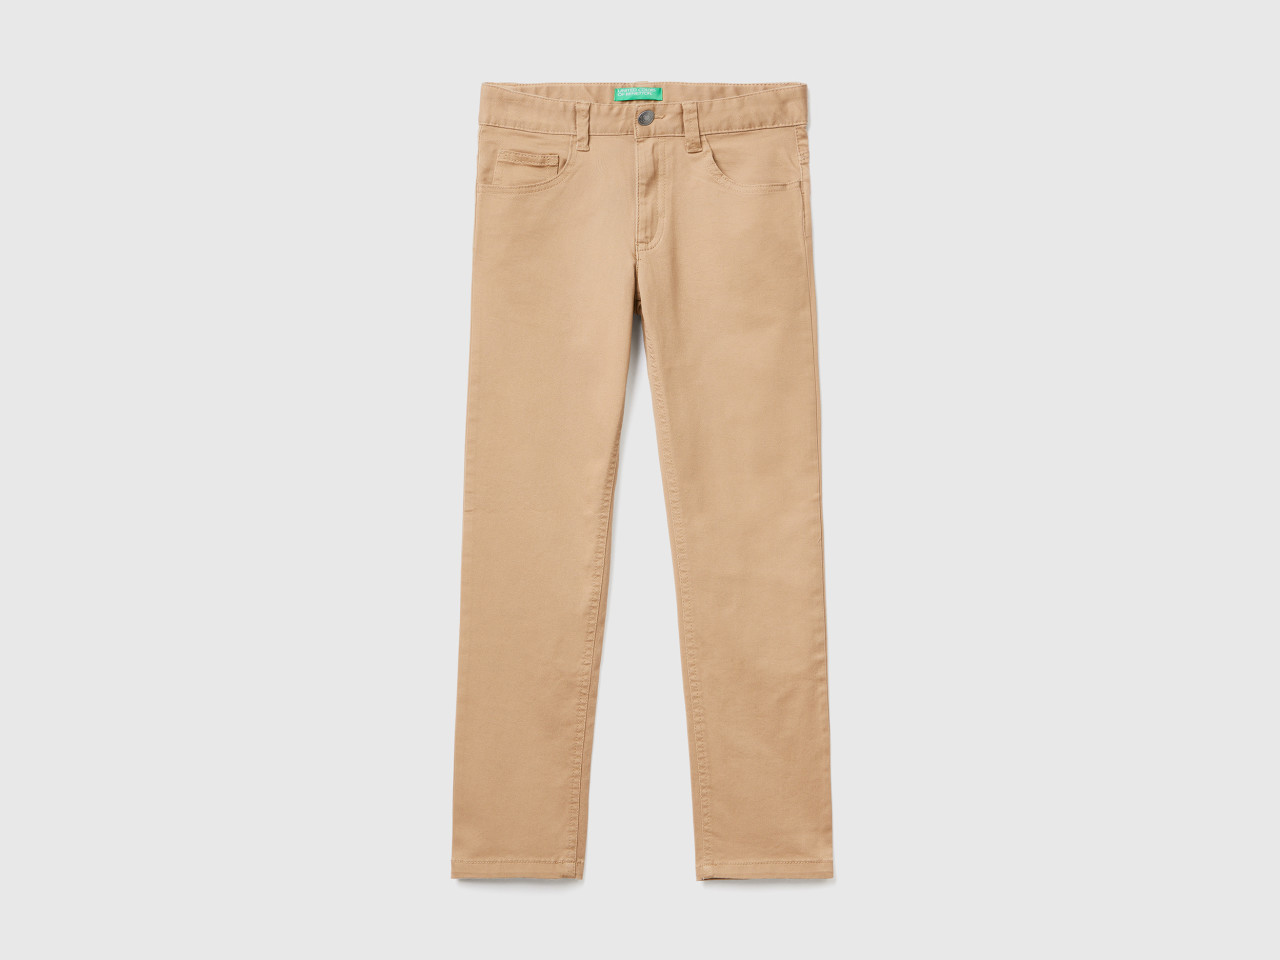 Boys tan chinos for weddings, parties and play dates | Tan chinos, Kids  pants, Boys chino pant